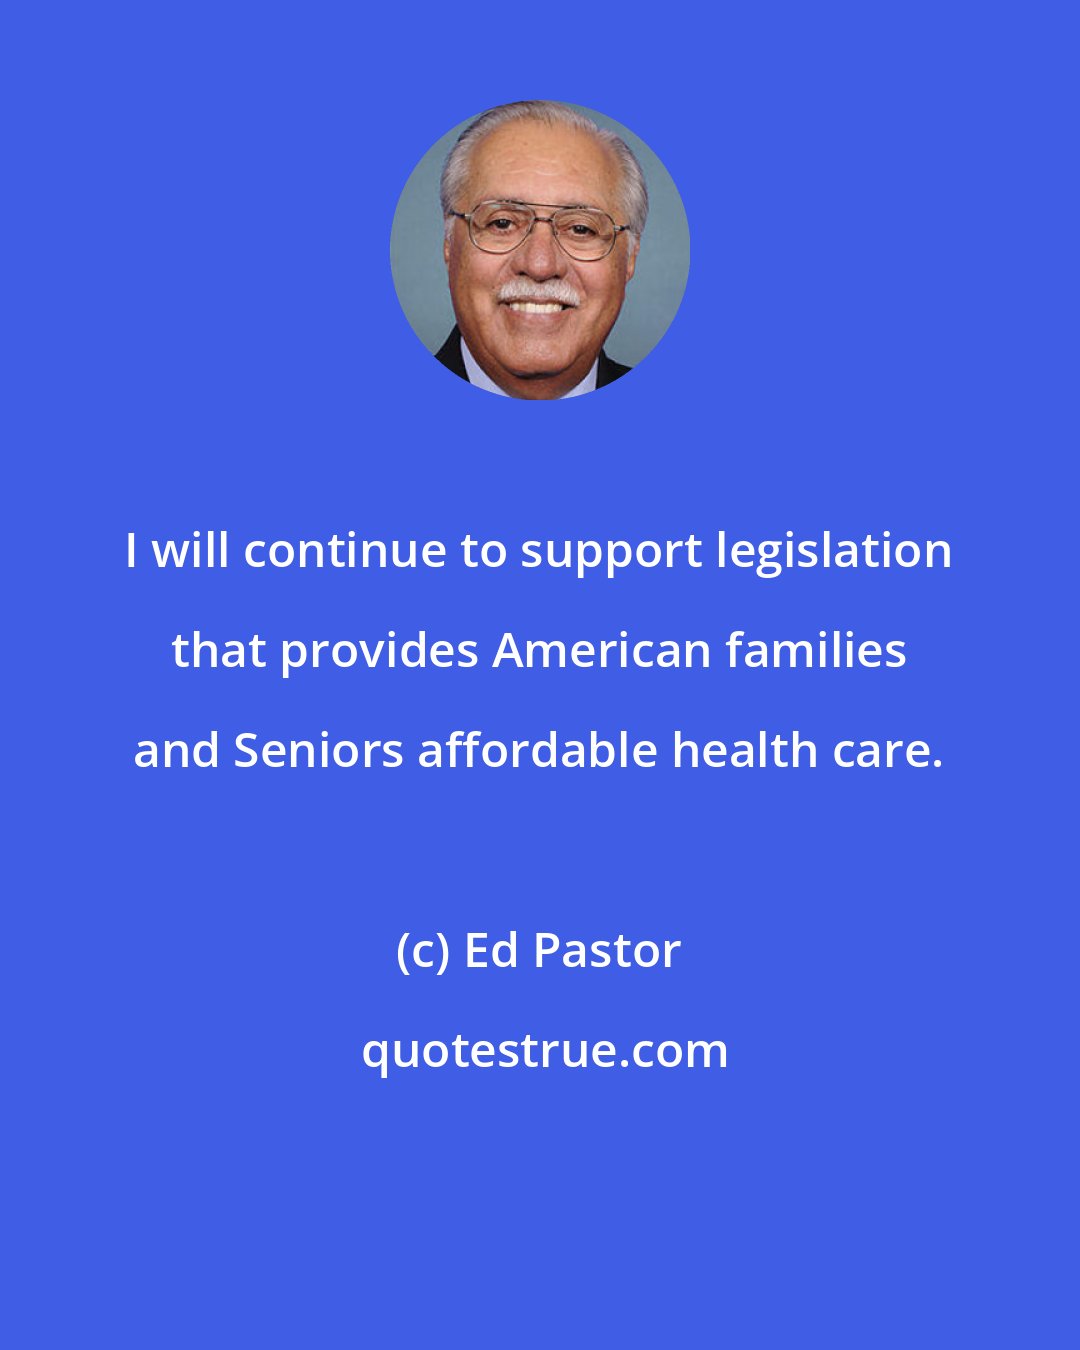 Ed Pastor: I will continue to support legislation that provides American families and Seniors affordable health care.